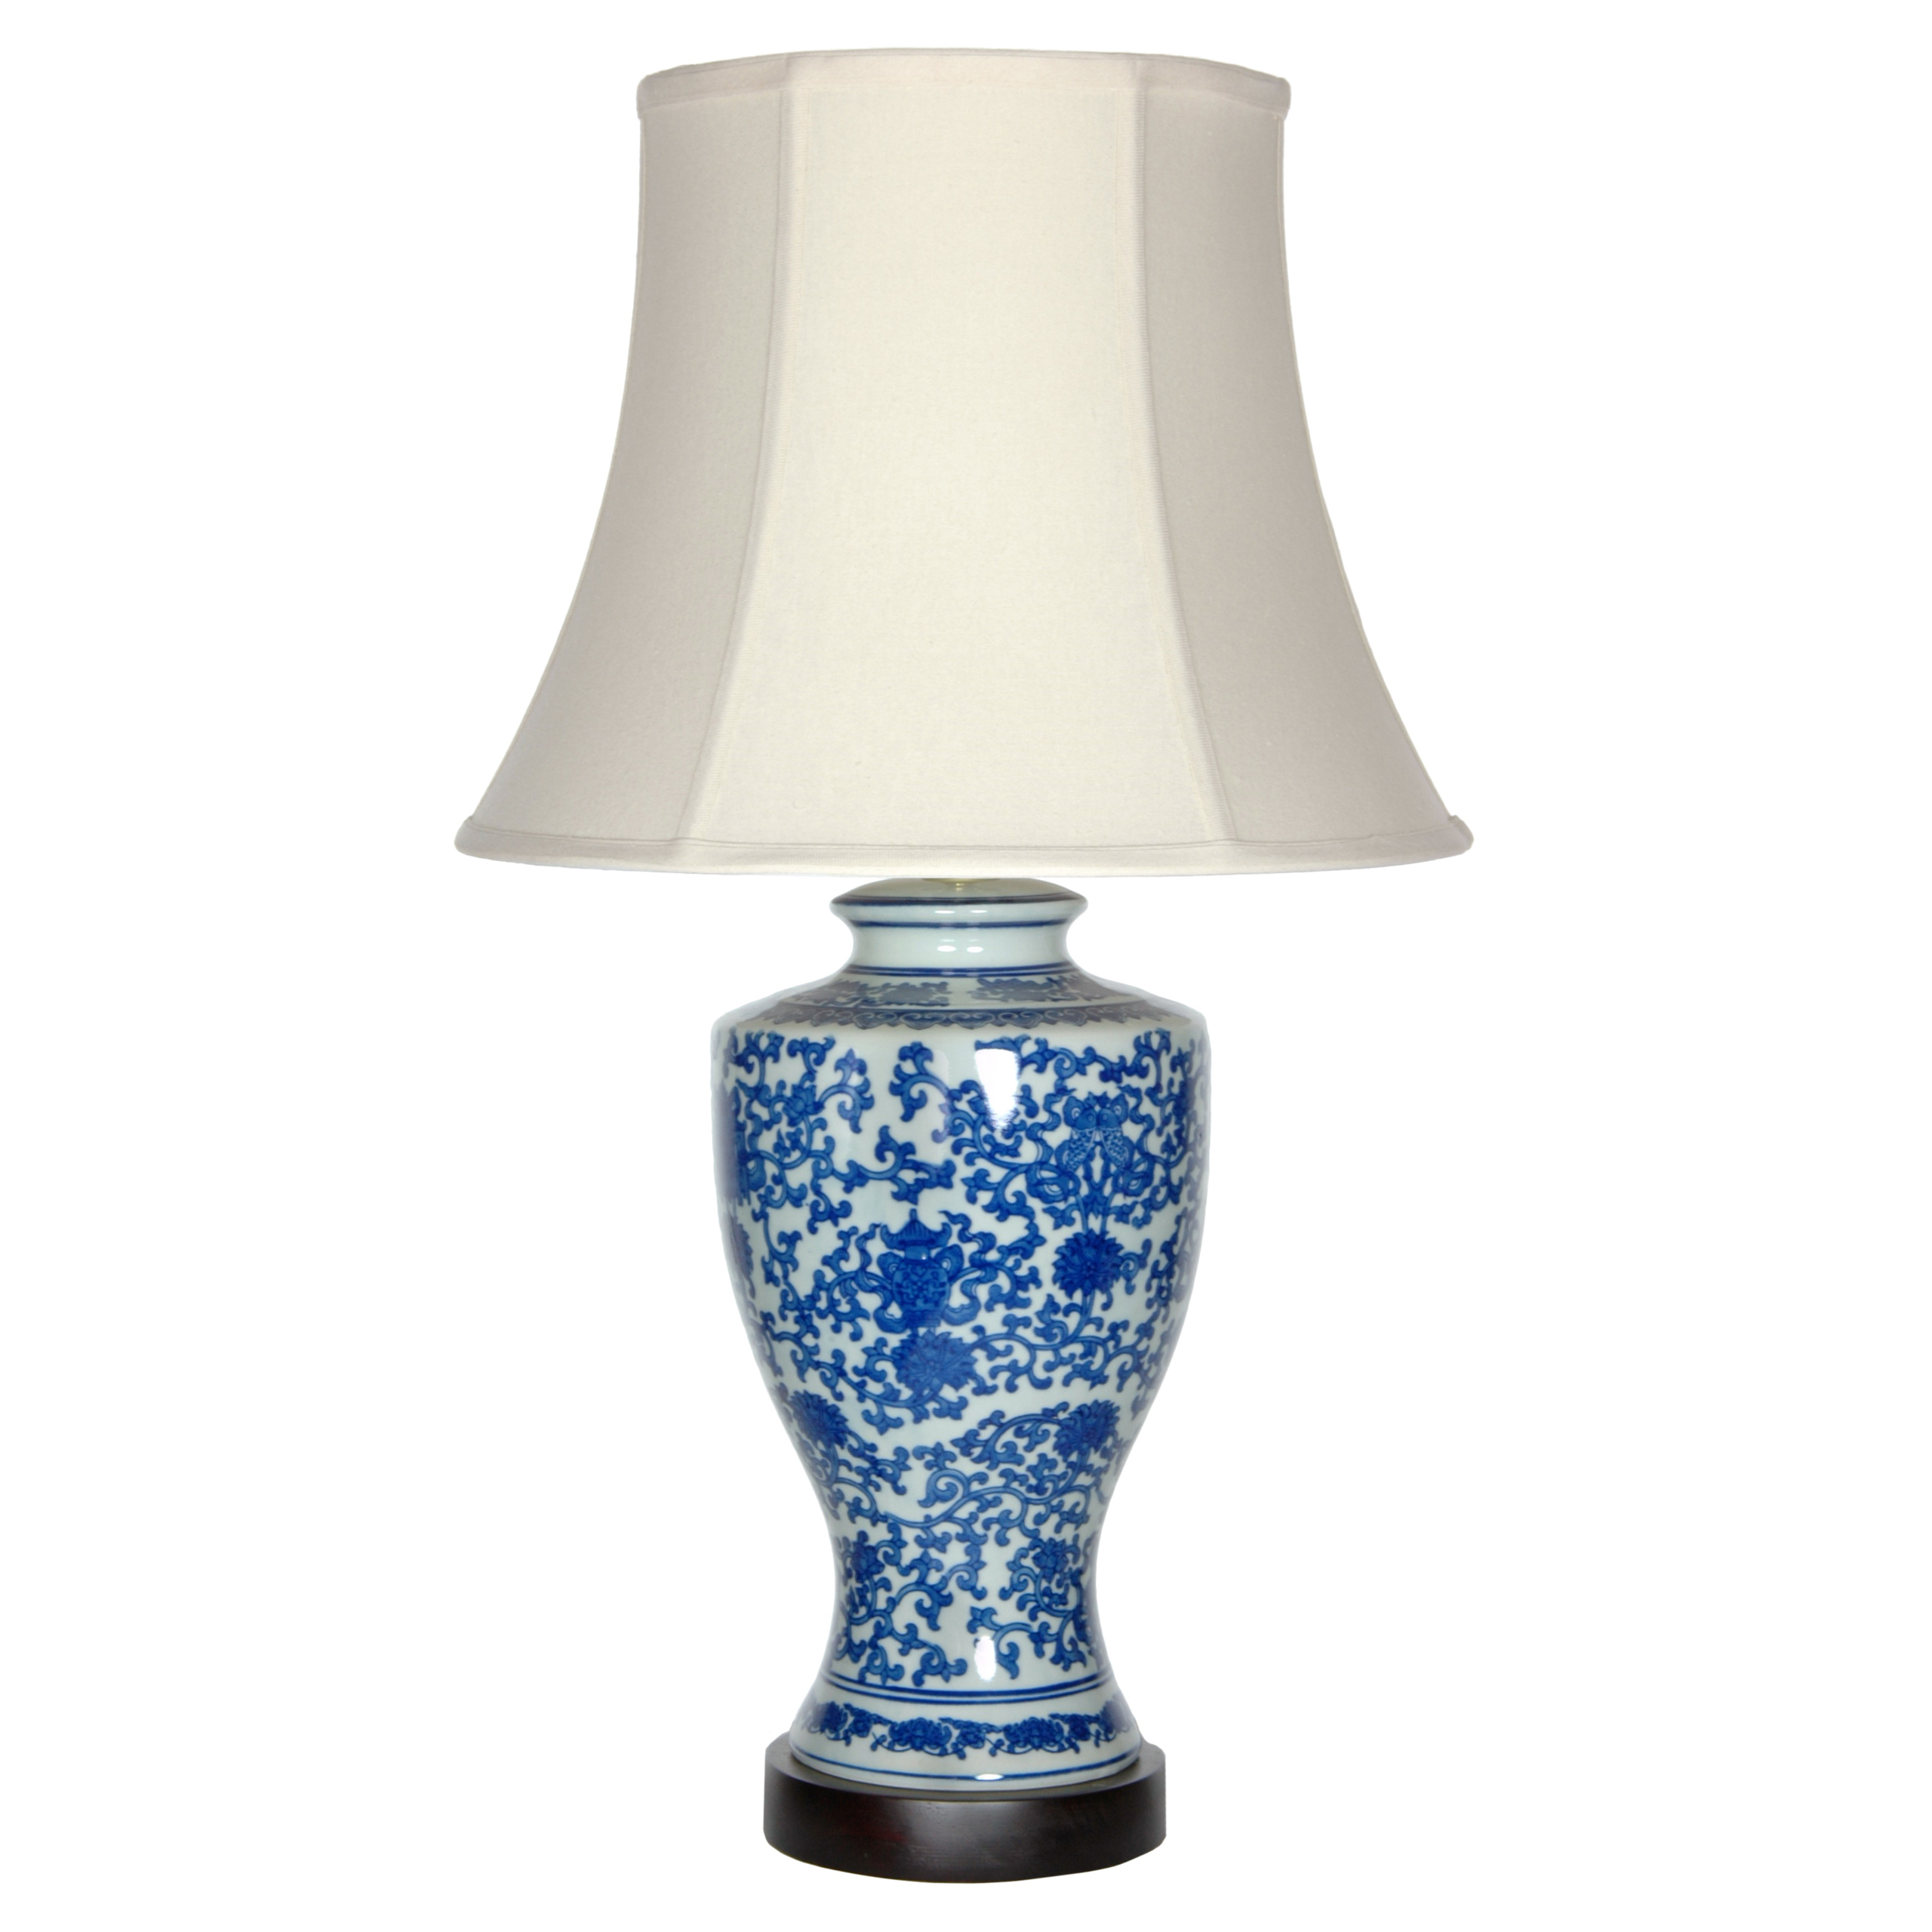 Oriental Furniture Victorian Design 28 H Table Lamp With Bell Shade